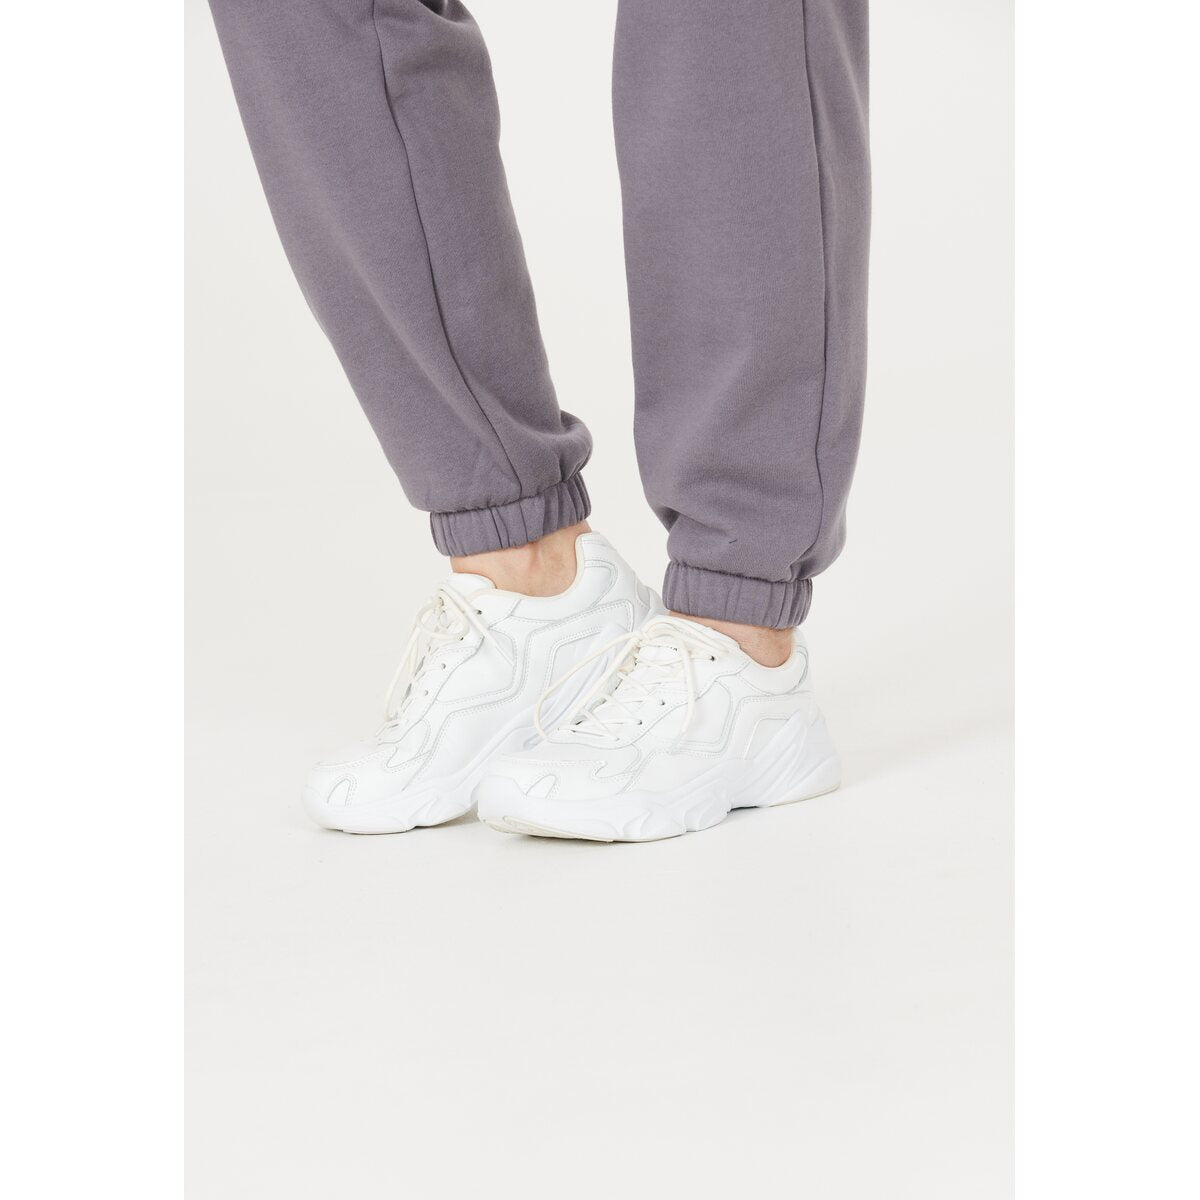 Athlecia Ruthie Womenswear Sweat Pants 5 Shaws Department Stores